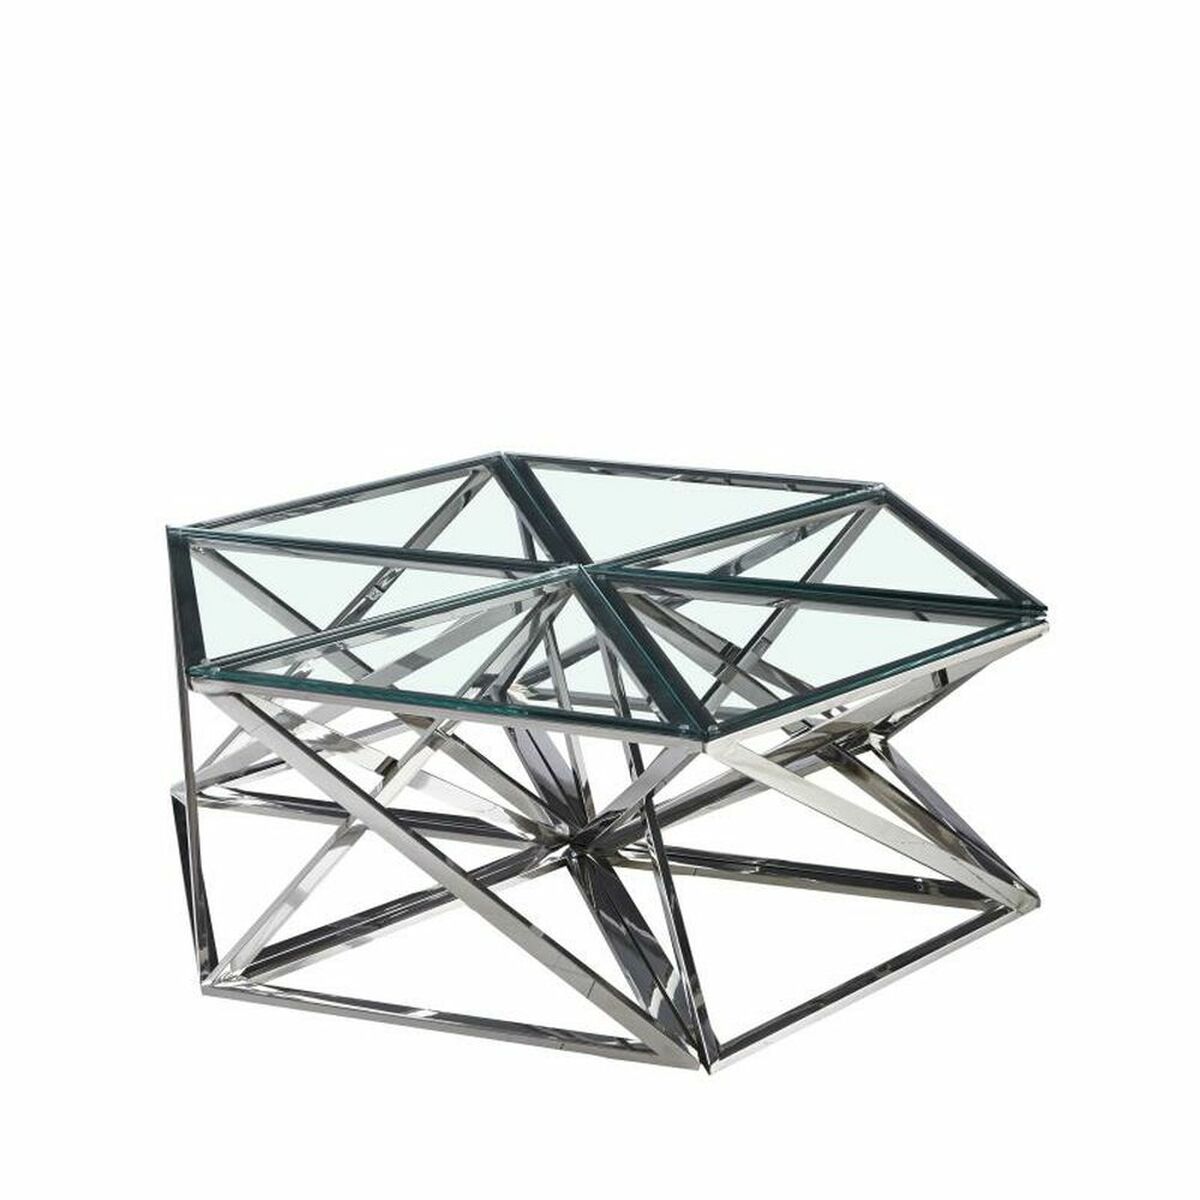 Side table DKD Home Decor Crystal Steel (6 pcs) (137.5 x 120.5 x 45.4 cm)